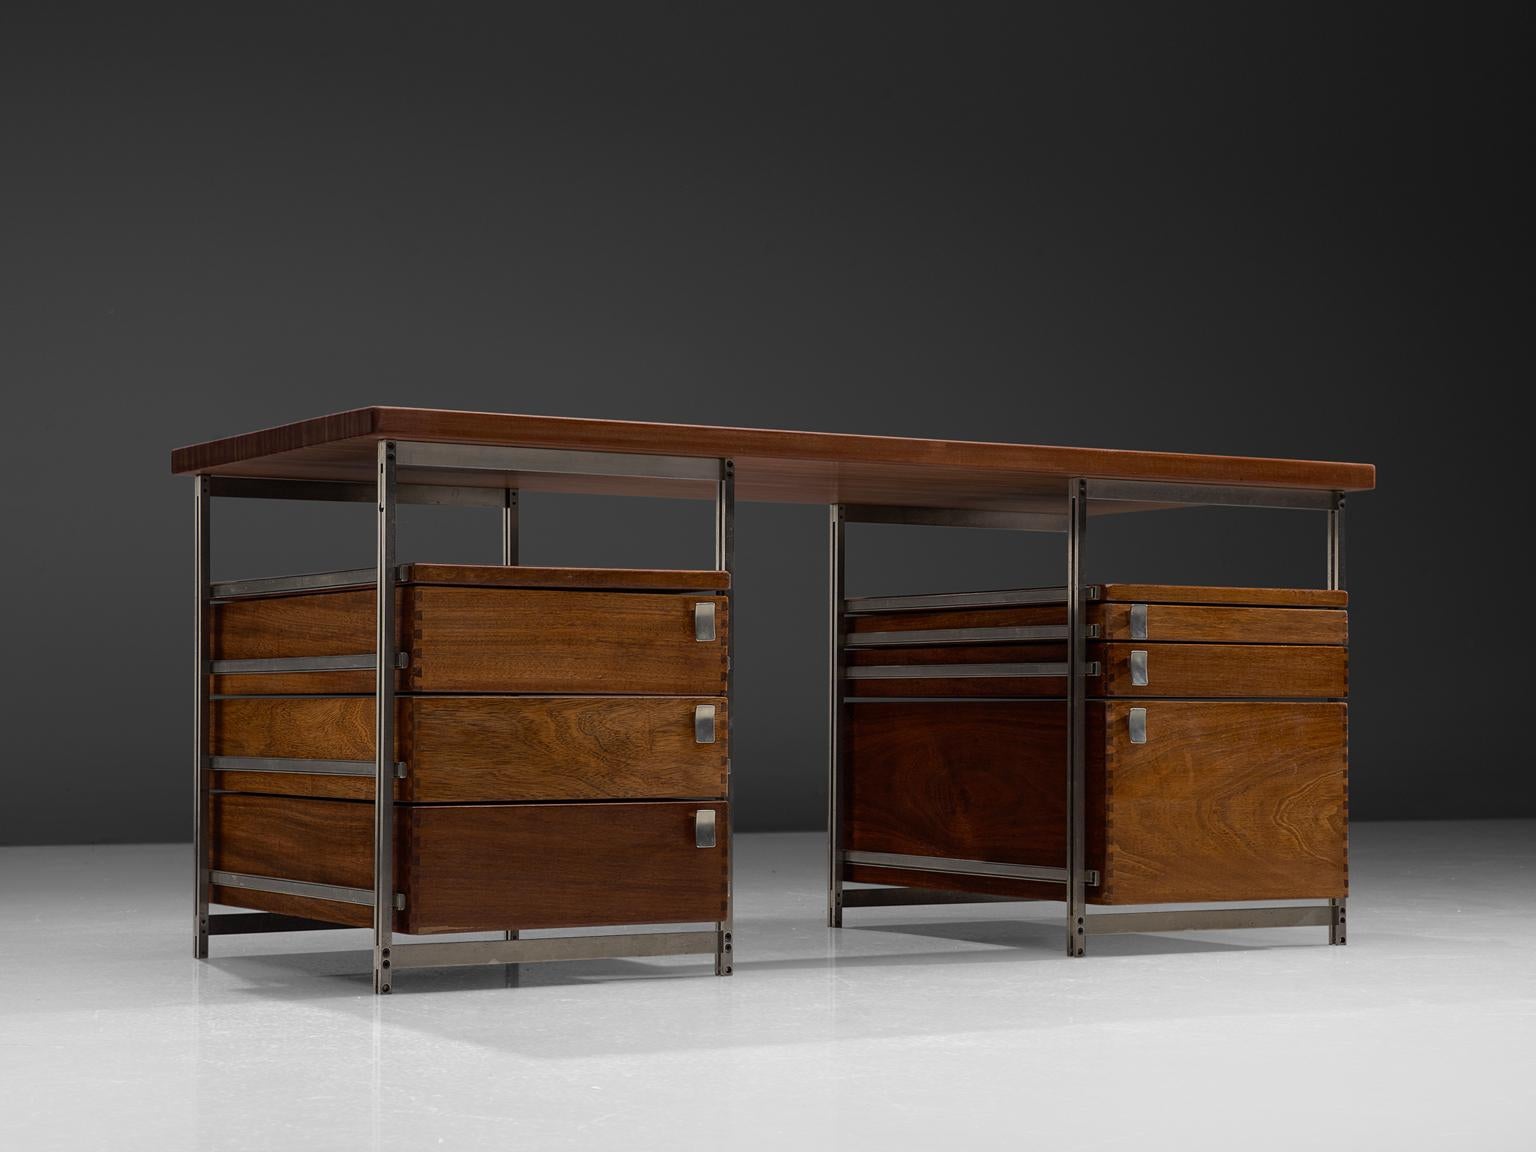 Jules Wabbes, writing desk from the Foncolin building, mutenyé and nickel-plated metal, Belgium, 1957.

Beautiful designed desk by one of Belgium's most renowned designers Jules Wabbes. This piece is made for the Foncolin building, one of Wabbes